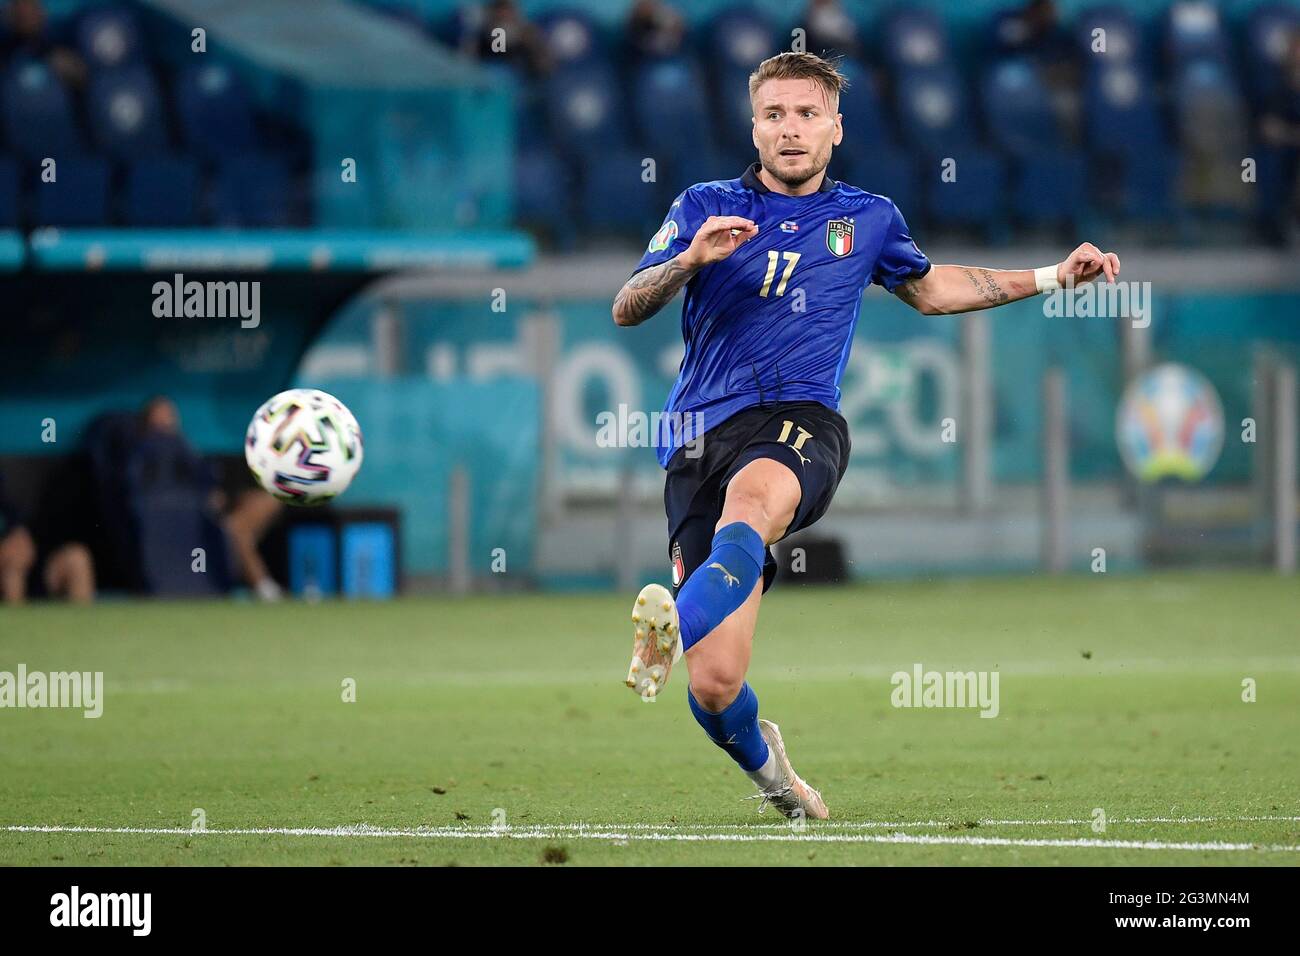 Roma, Italy. 16th June, 2021. Ciro Immobile of Italy during the Uefa Euro 2020 Group stage - Group A football match between Italy and Switzerland at stadio Olimpico in Rome (Italy), June 16th, 2021. Photo Andrea Staccioli/Insidefoto Credit: insidefoto srl/Alamy Live News Stock Photo